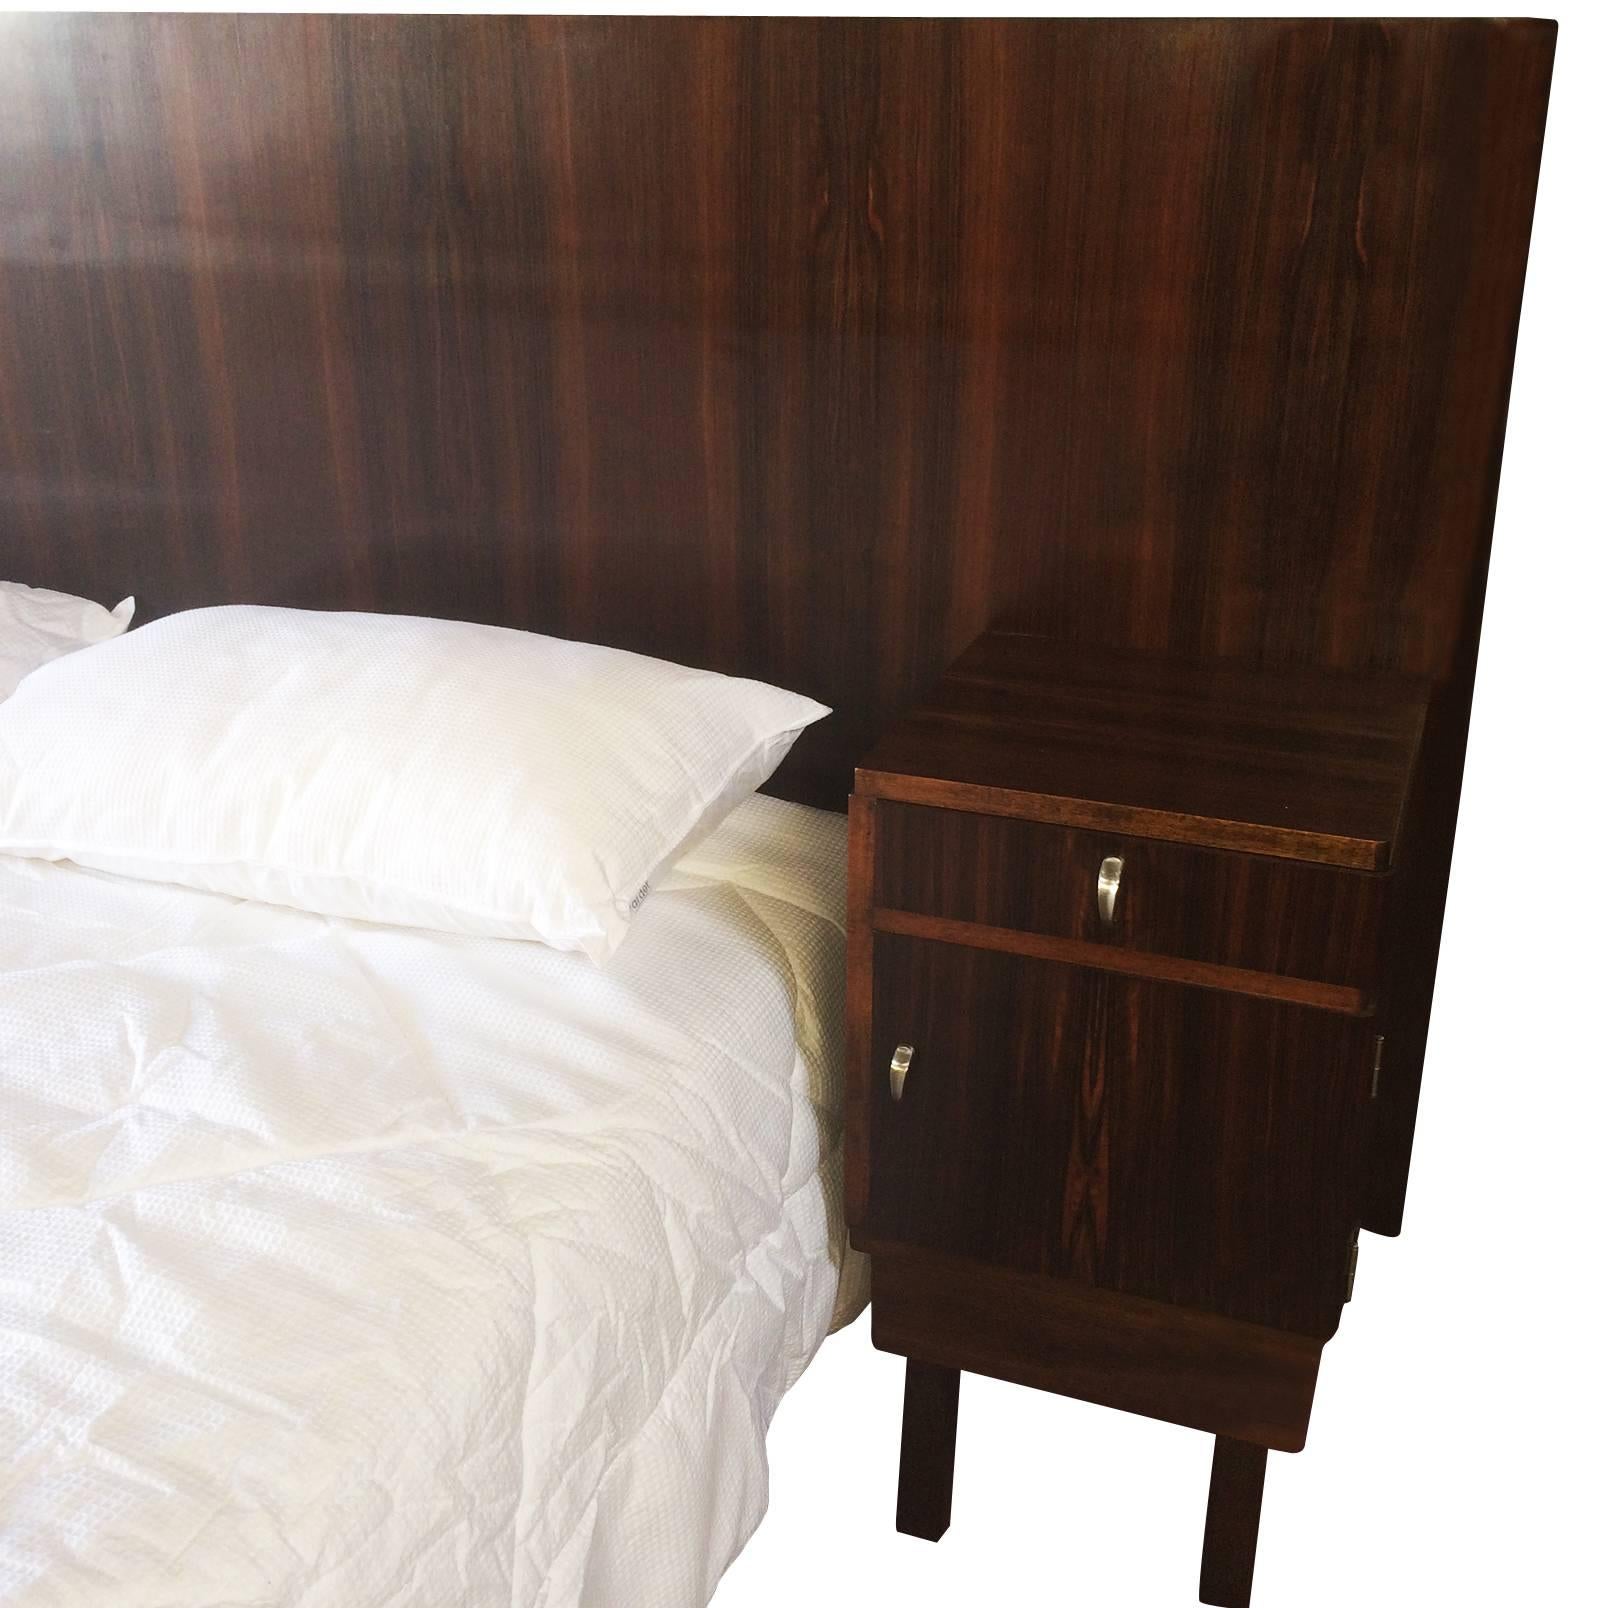 Art Deco Queen-Size Bed and Bedside Tables in Macassar Wood In Excellent Condition For Sale In Daylesford, Victoria